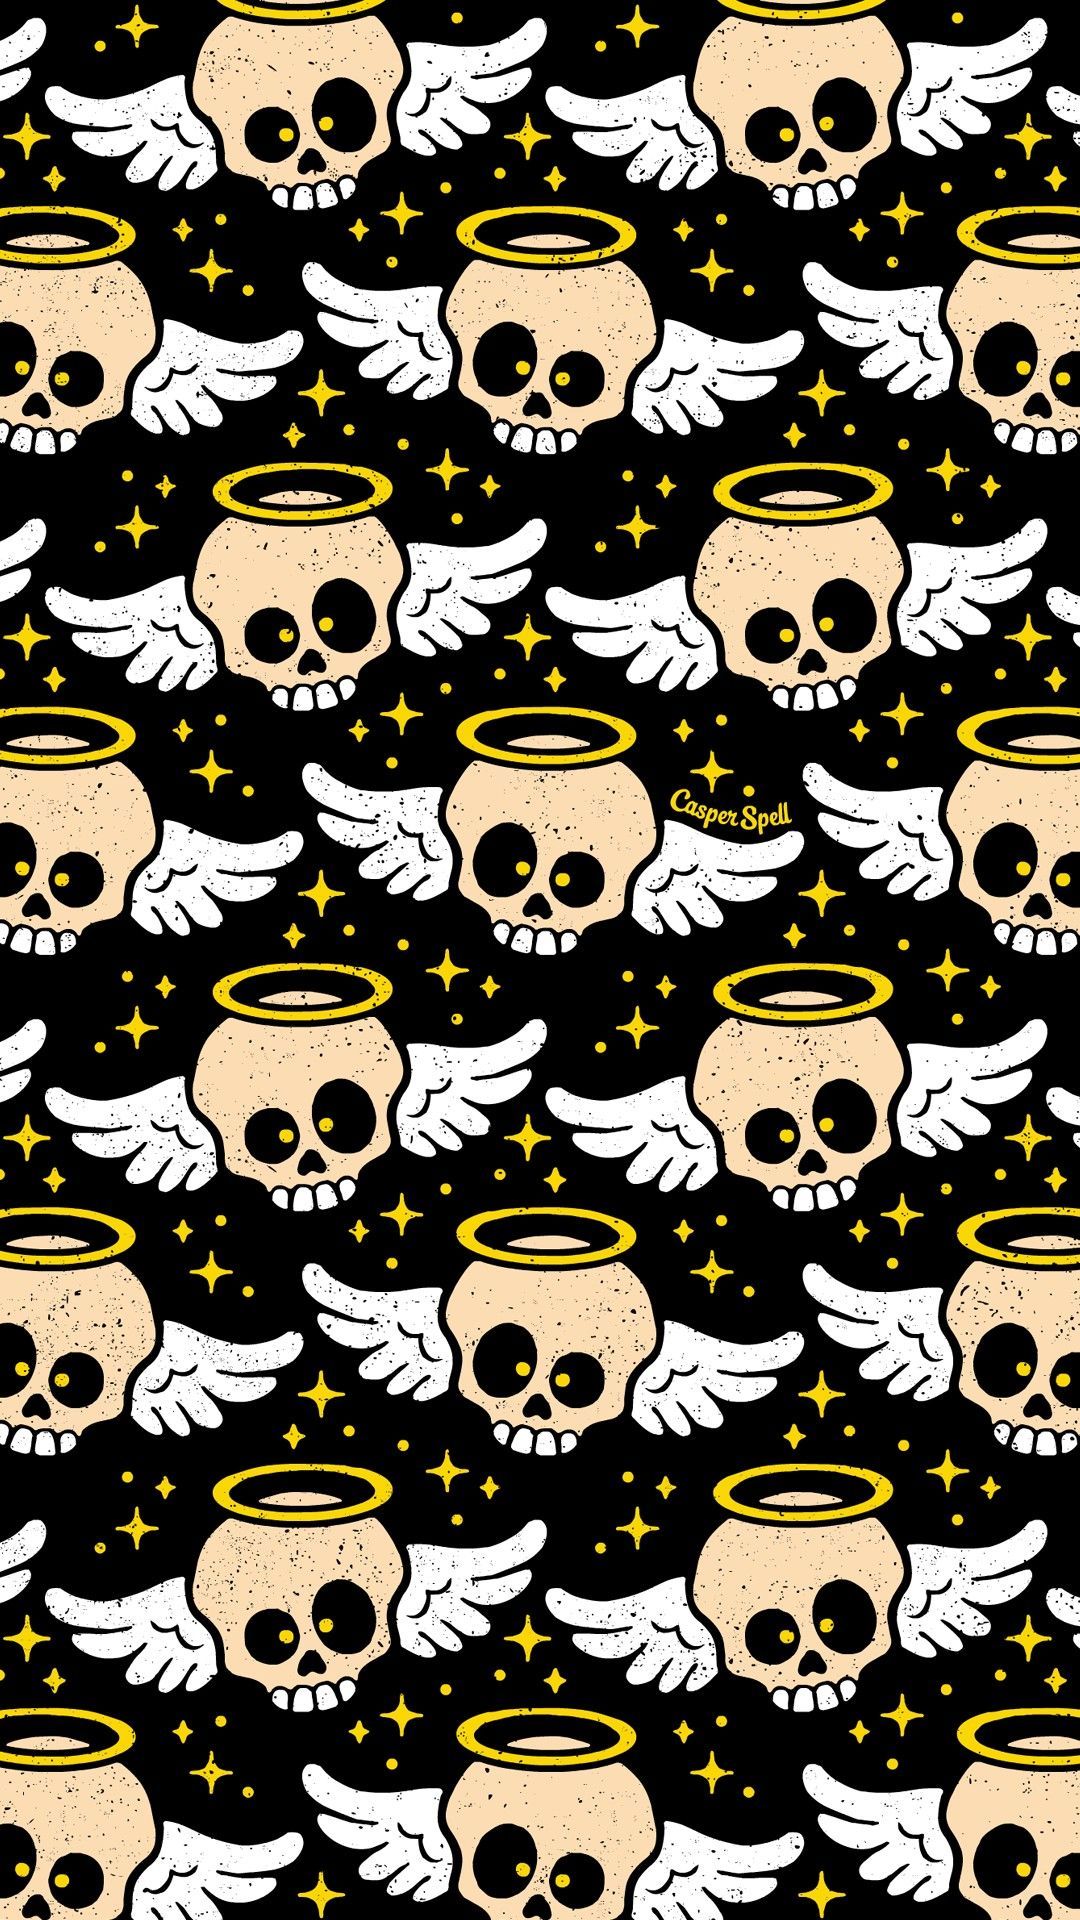 Cute Halloween Skeleton Wallpaper & Background Beautiful Best Available For Download Cute Halloween Skeleton Photo Free On Zicxa.com Image